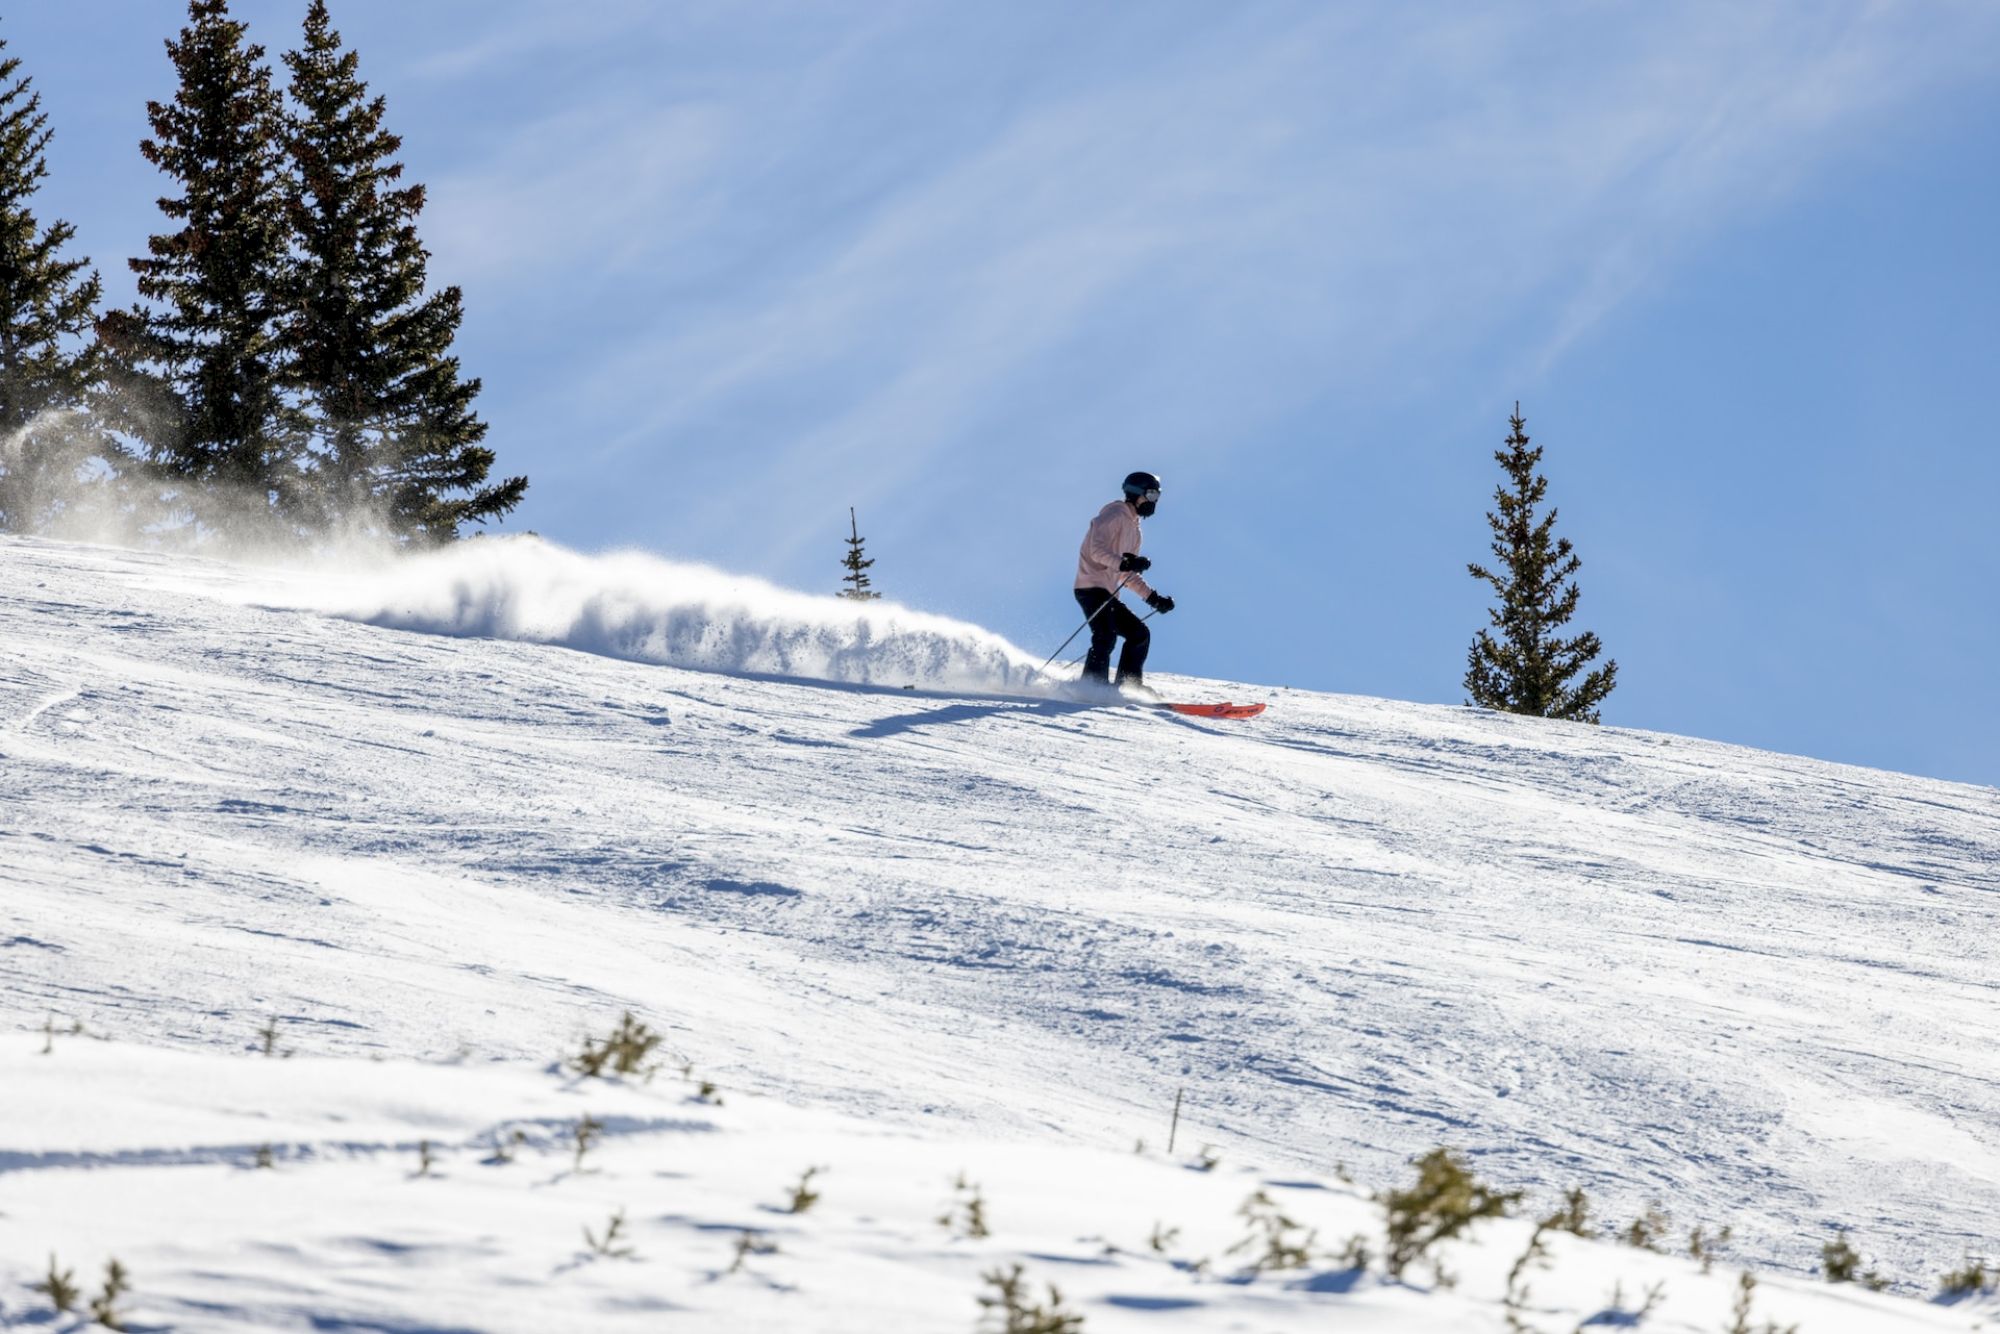 A skier is gliding down a snowy slope surrounded by trees, under a clear blue sky. Snow is being kicked up behind the skier as he moves.